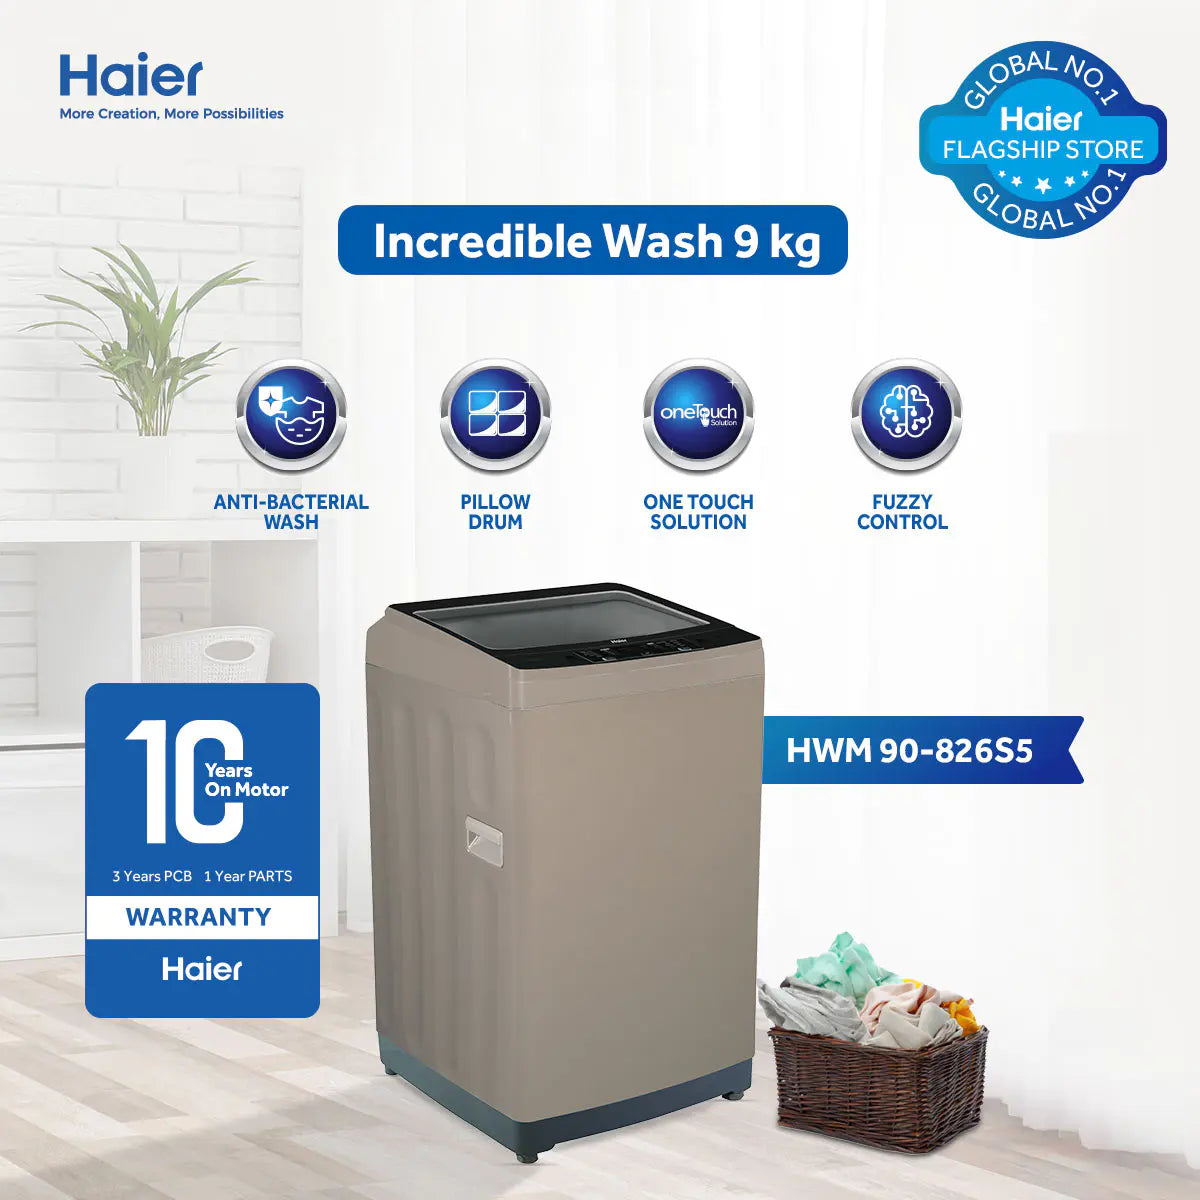 Haier 9kg-HWM 90-826-Fully Automatic-Top Load Washing Machine-Incredible Wash-10 Years Brand Warranty